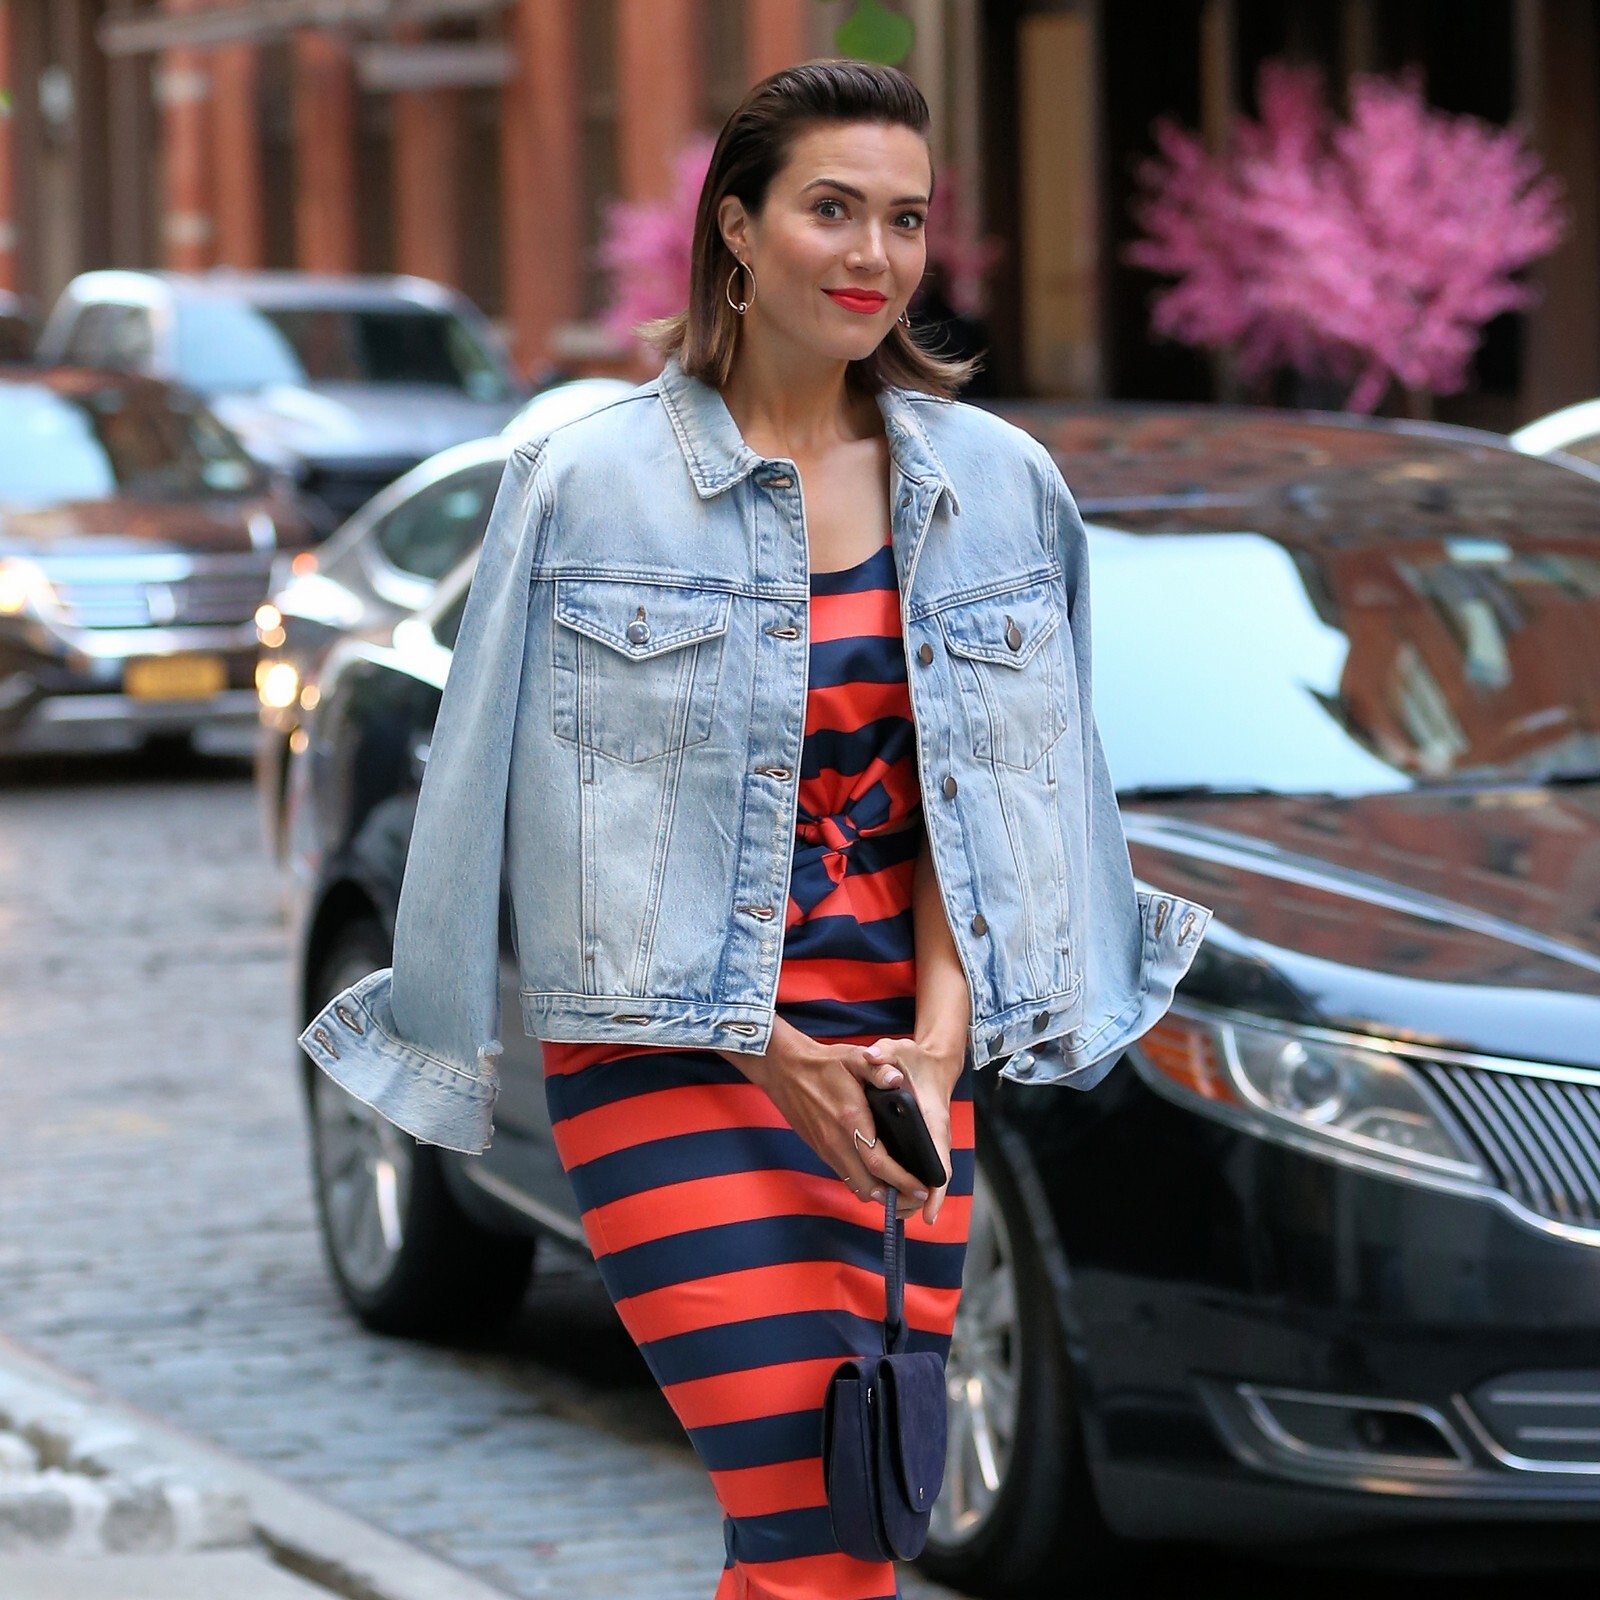 Mandy Moore Spotted In NYC